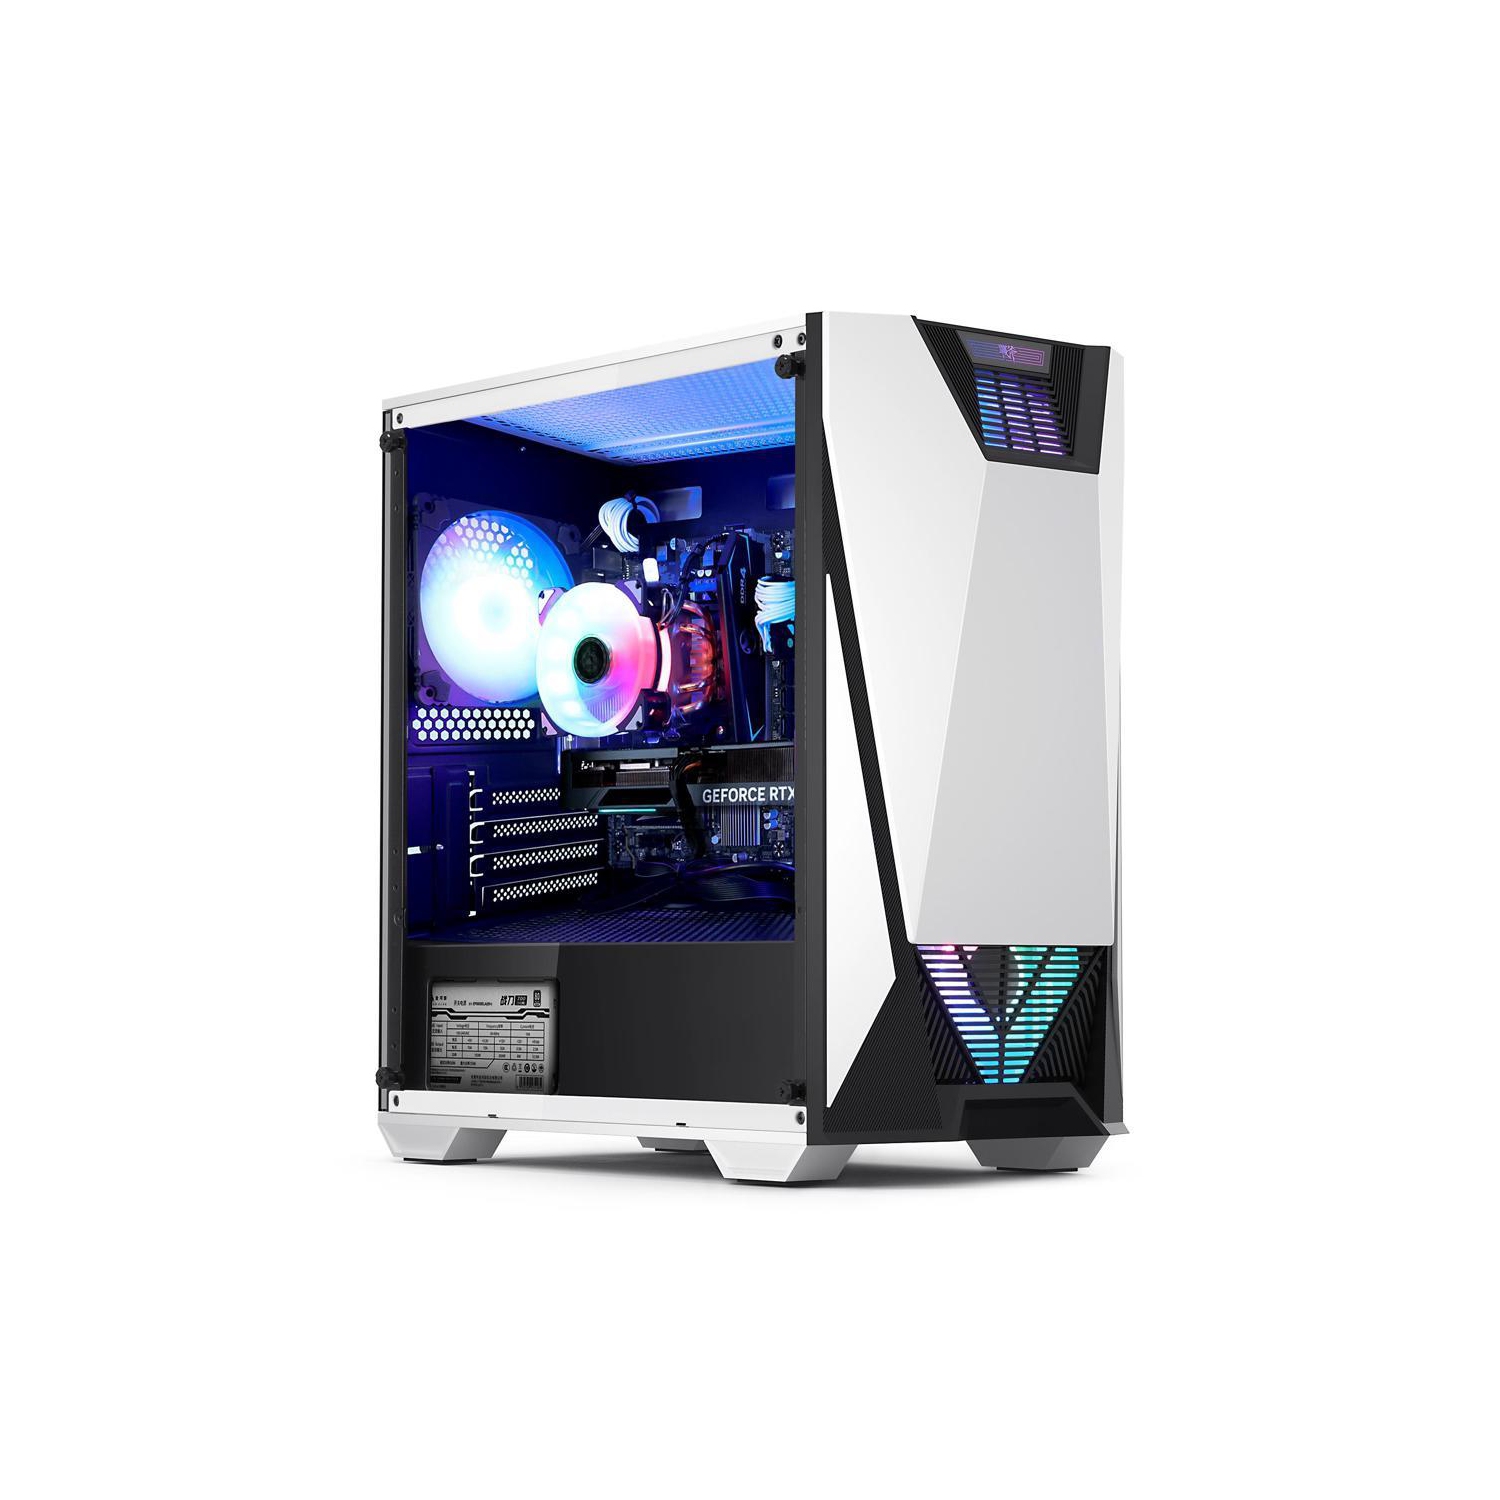 Hoengager Battleaxe Gaming - Intel Core i5-12600K 10-Core 3.7GHz-NVIDIA GeForce RTX 3060 Ti- 16GB DDR4 3200MHz - 1TB+500GB M.2 NVMe SSD- WIFI -RGB Fans - Windows 11 Pro Computer